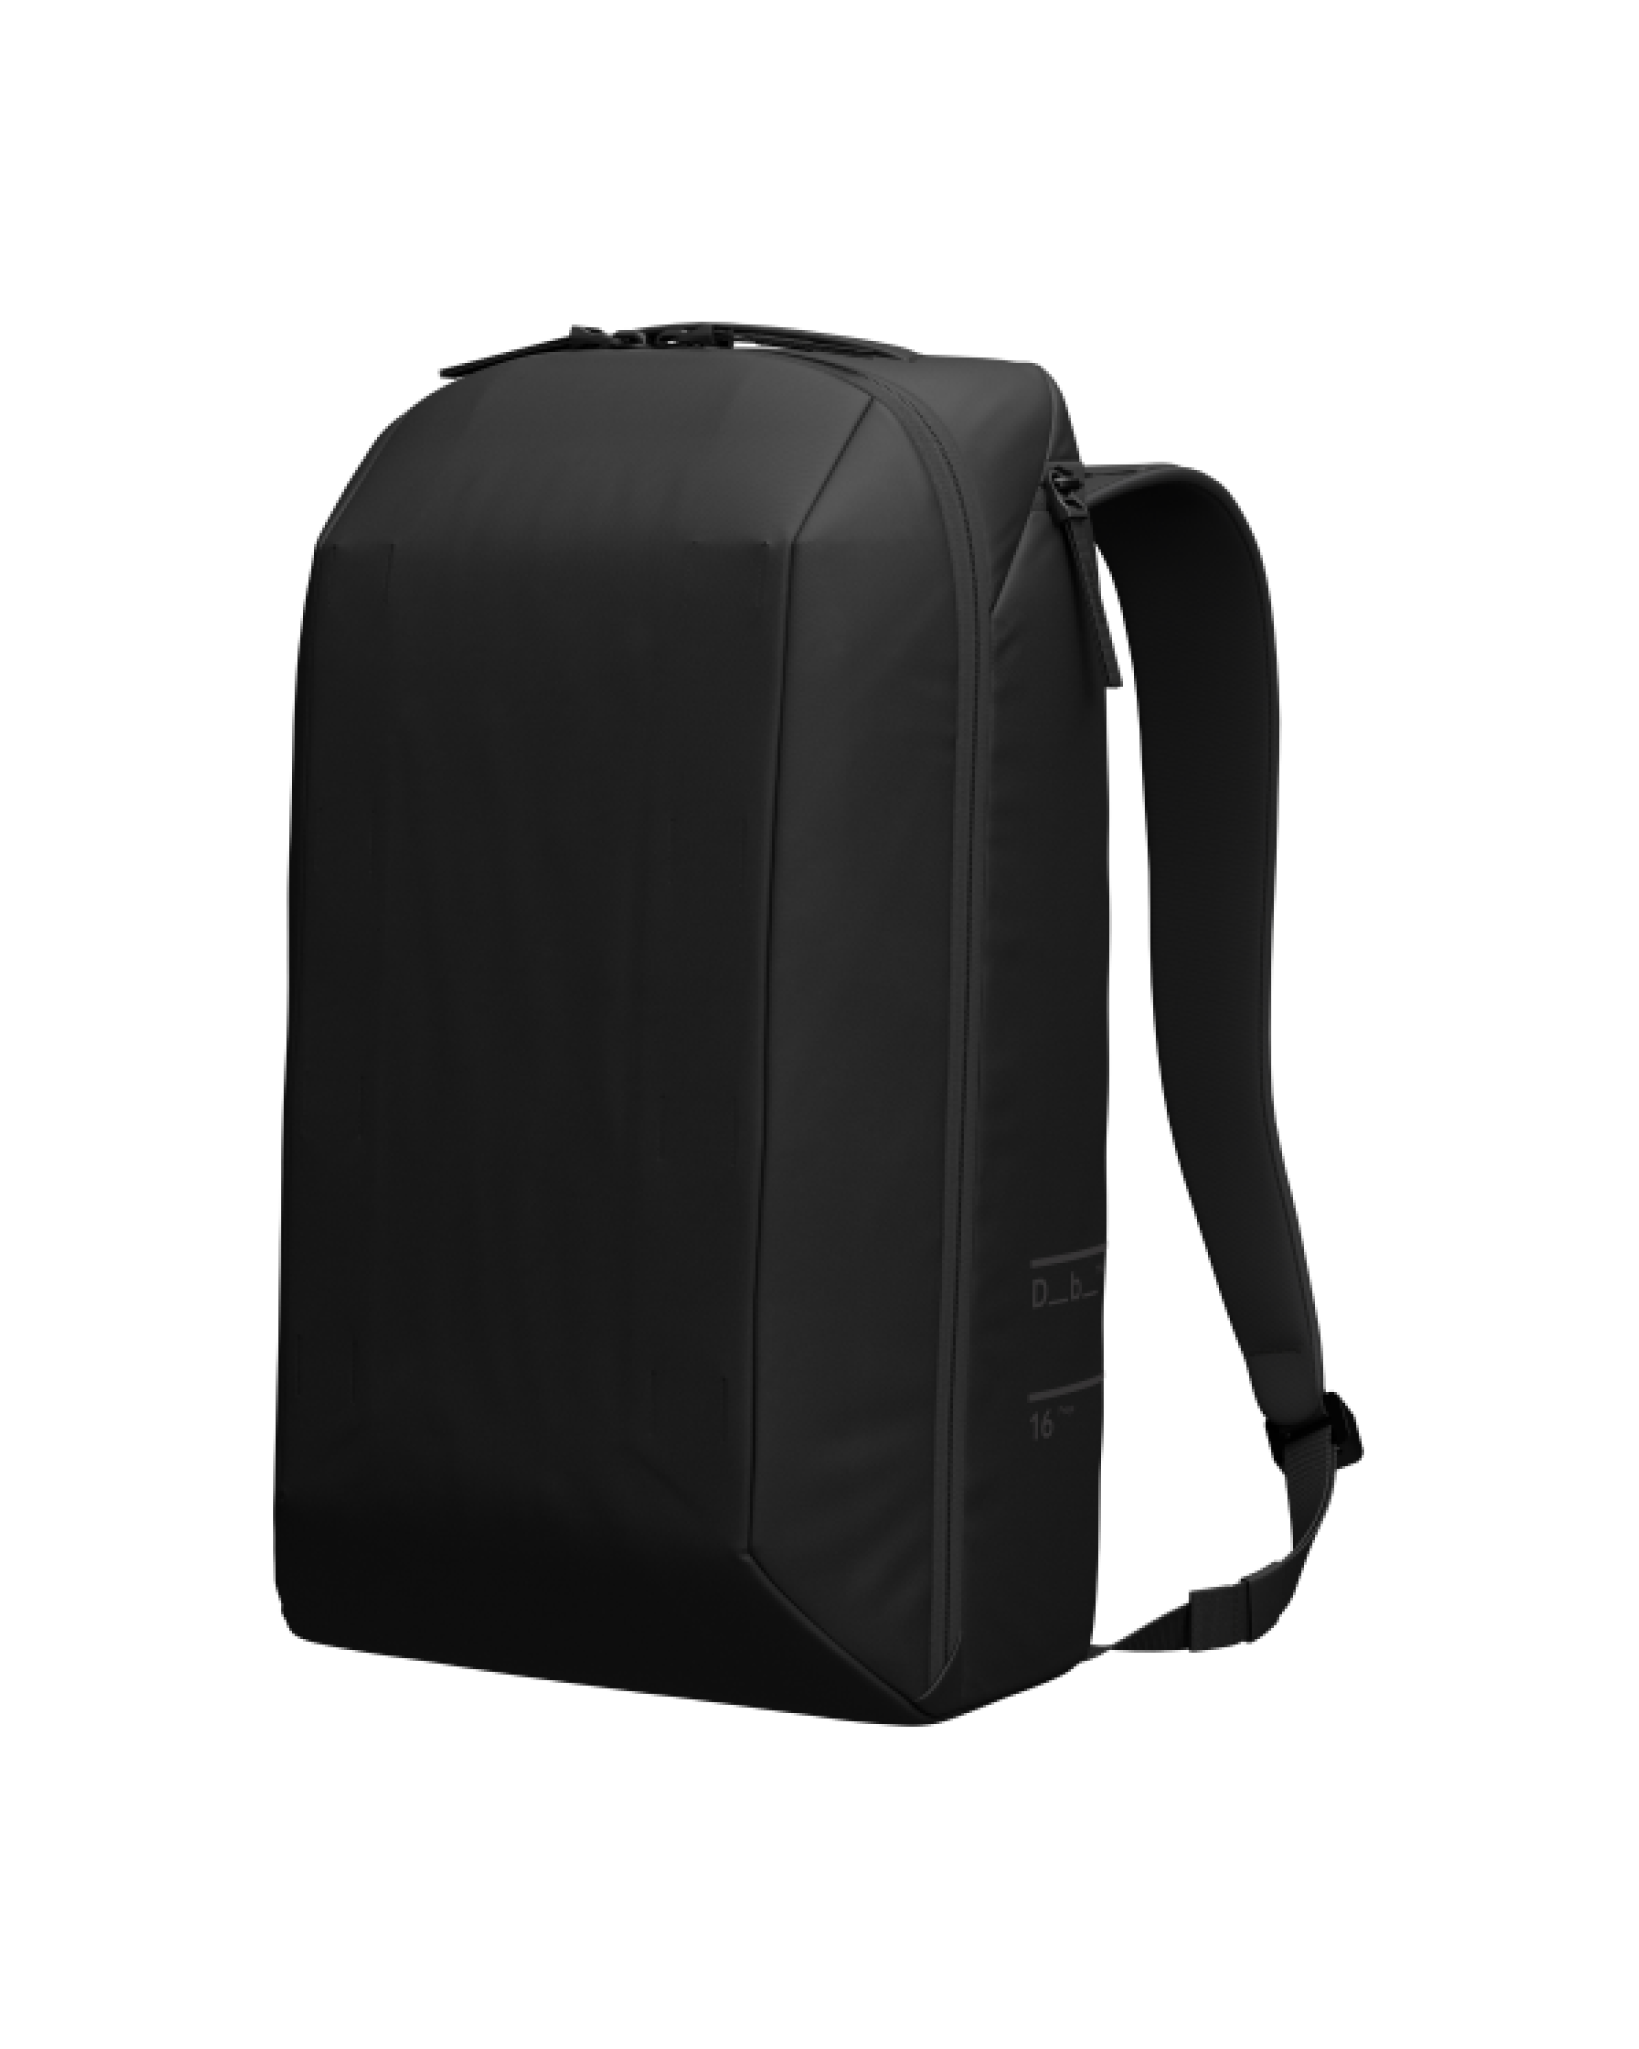 Freya Backpack 16L Black Out - Black Out